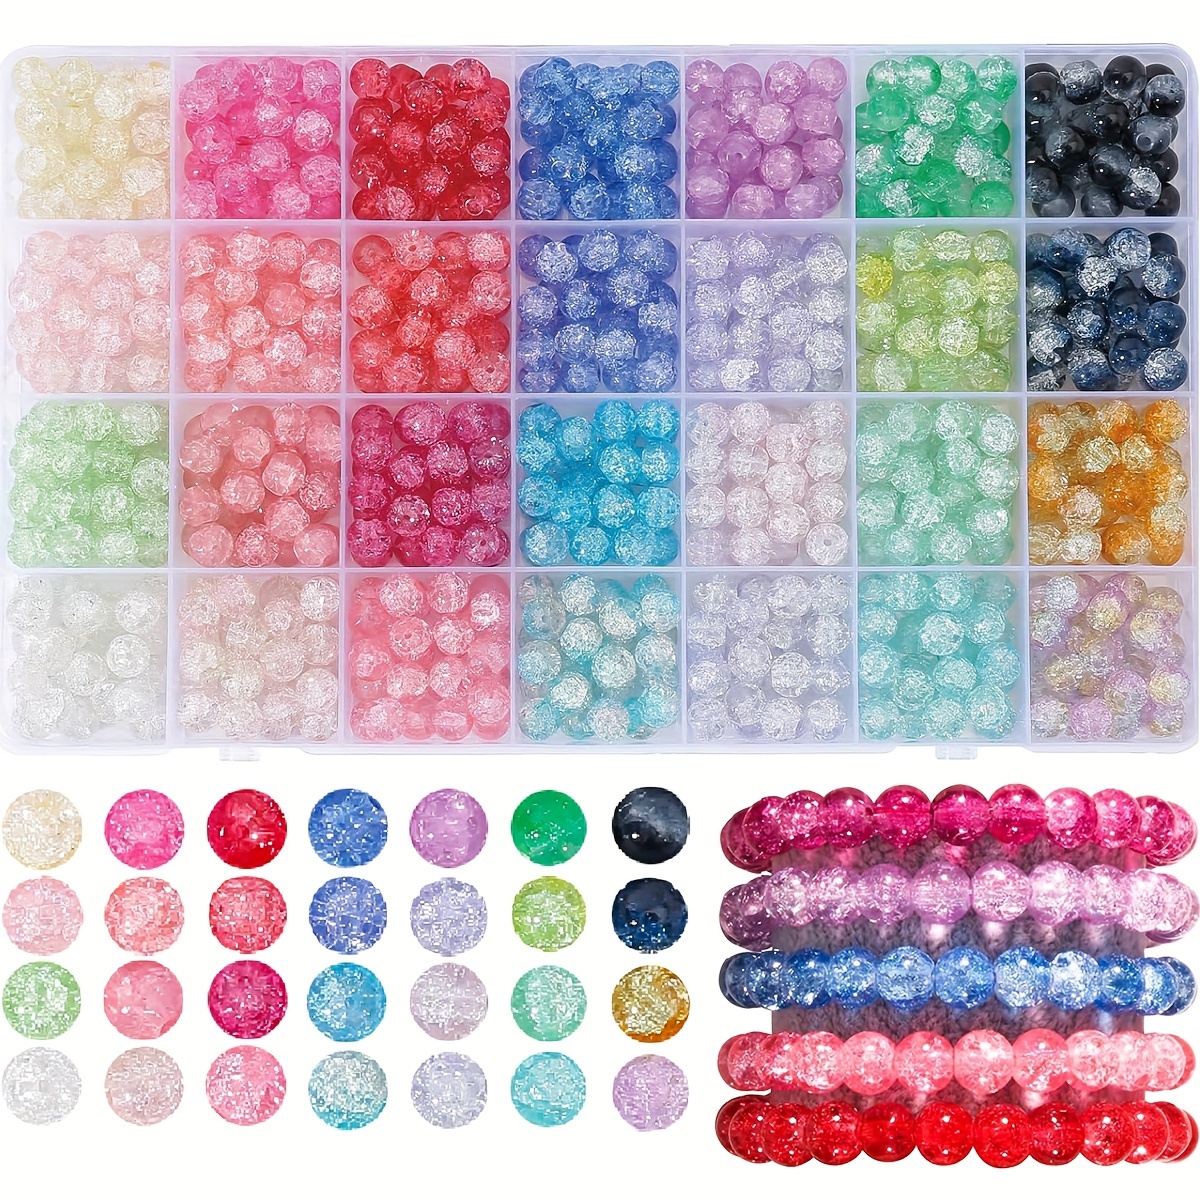 

560pcs 8mm Snowflake Crackle Glass Beads, Jewelry Making Kit, Gradient Spacer Beads For Earrings Bracelet Necklace Jewelry Making Crafts For Daily Use Gifts